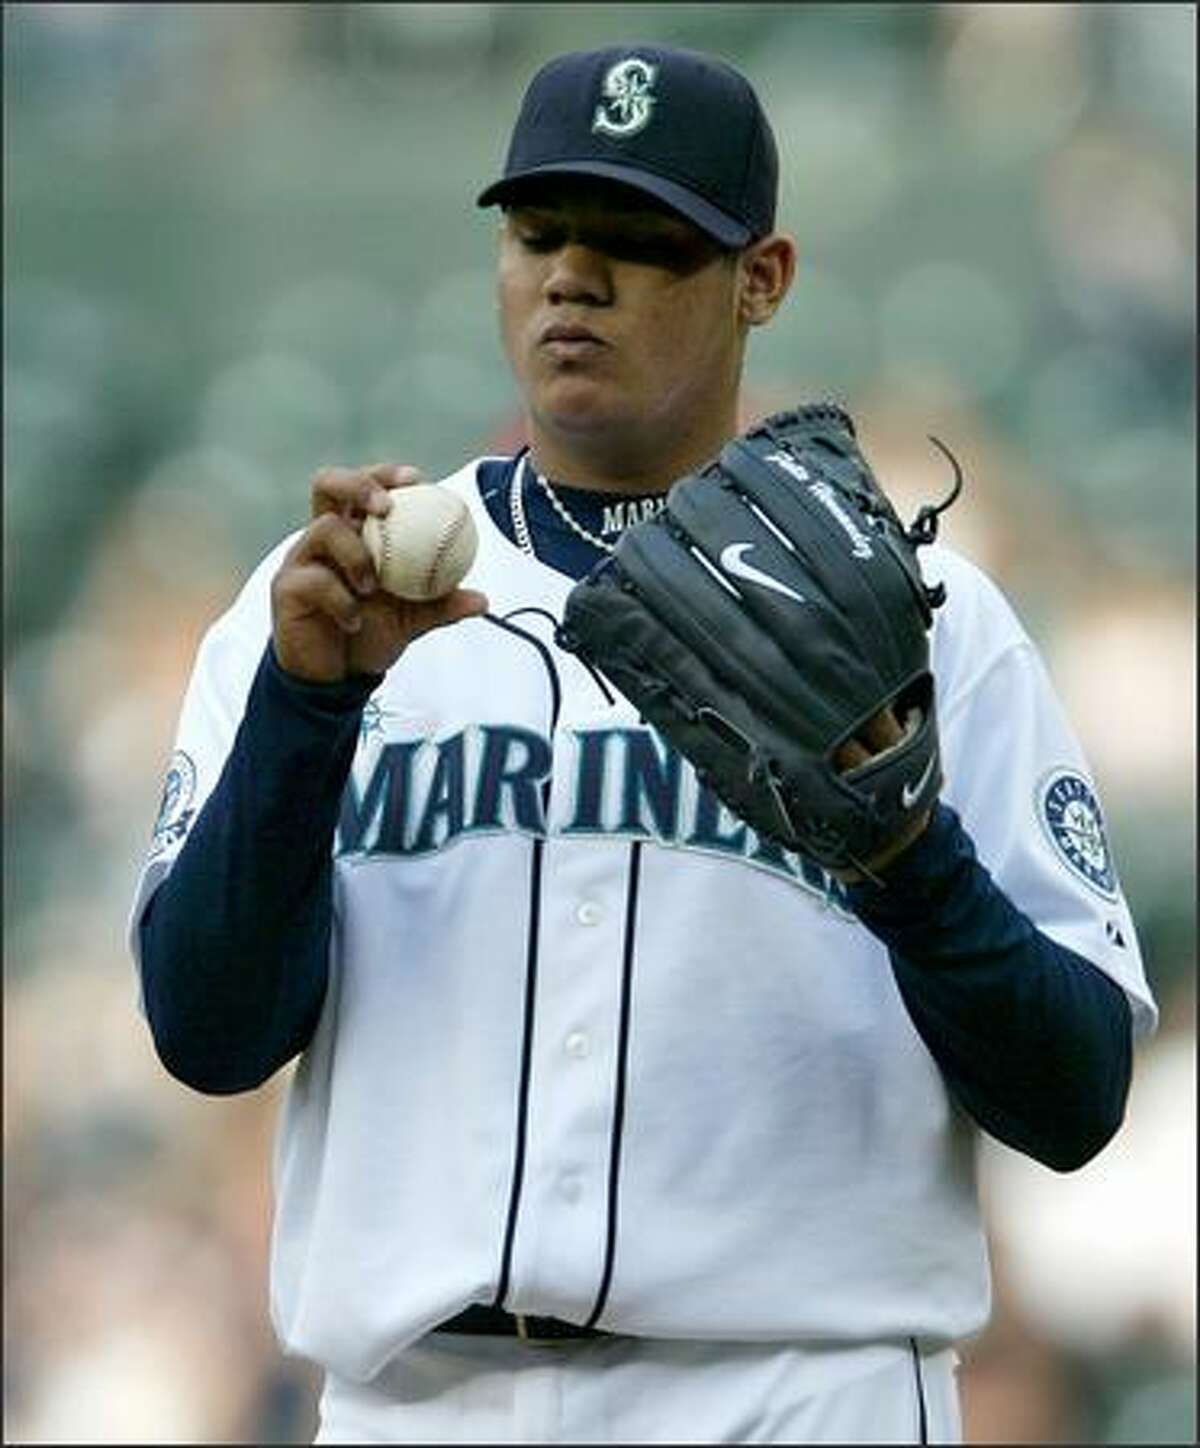 Seattle Mariners Felix Hernandez inspects the ball as he works through a rough start against the Boston Red Sox during first inning action at Safeco Field in Seattle Tuesday.